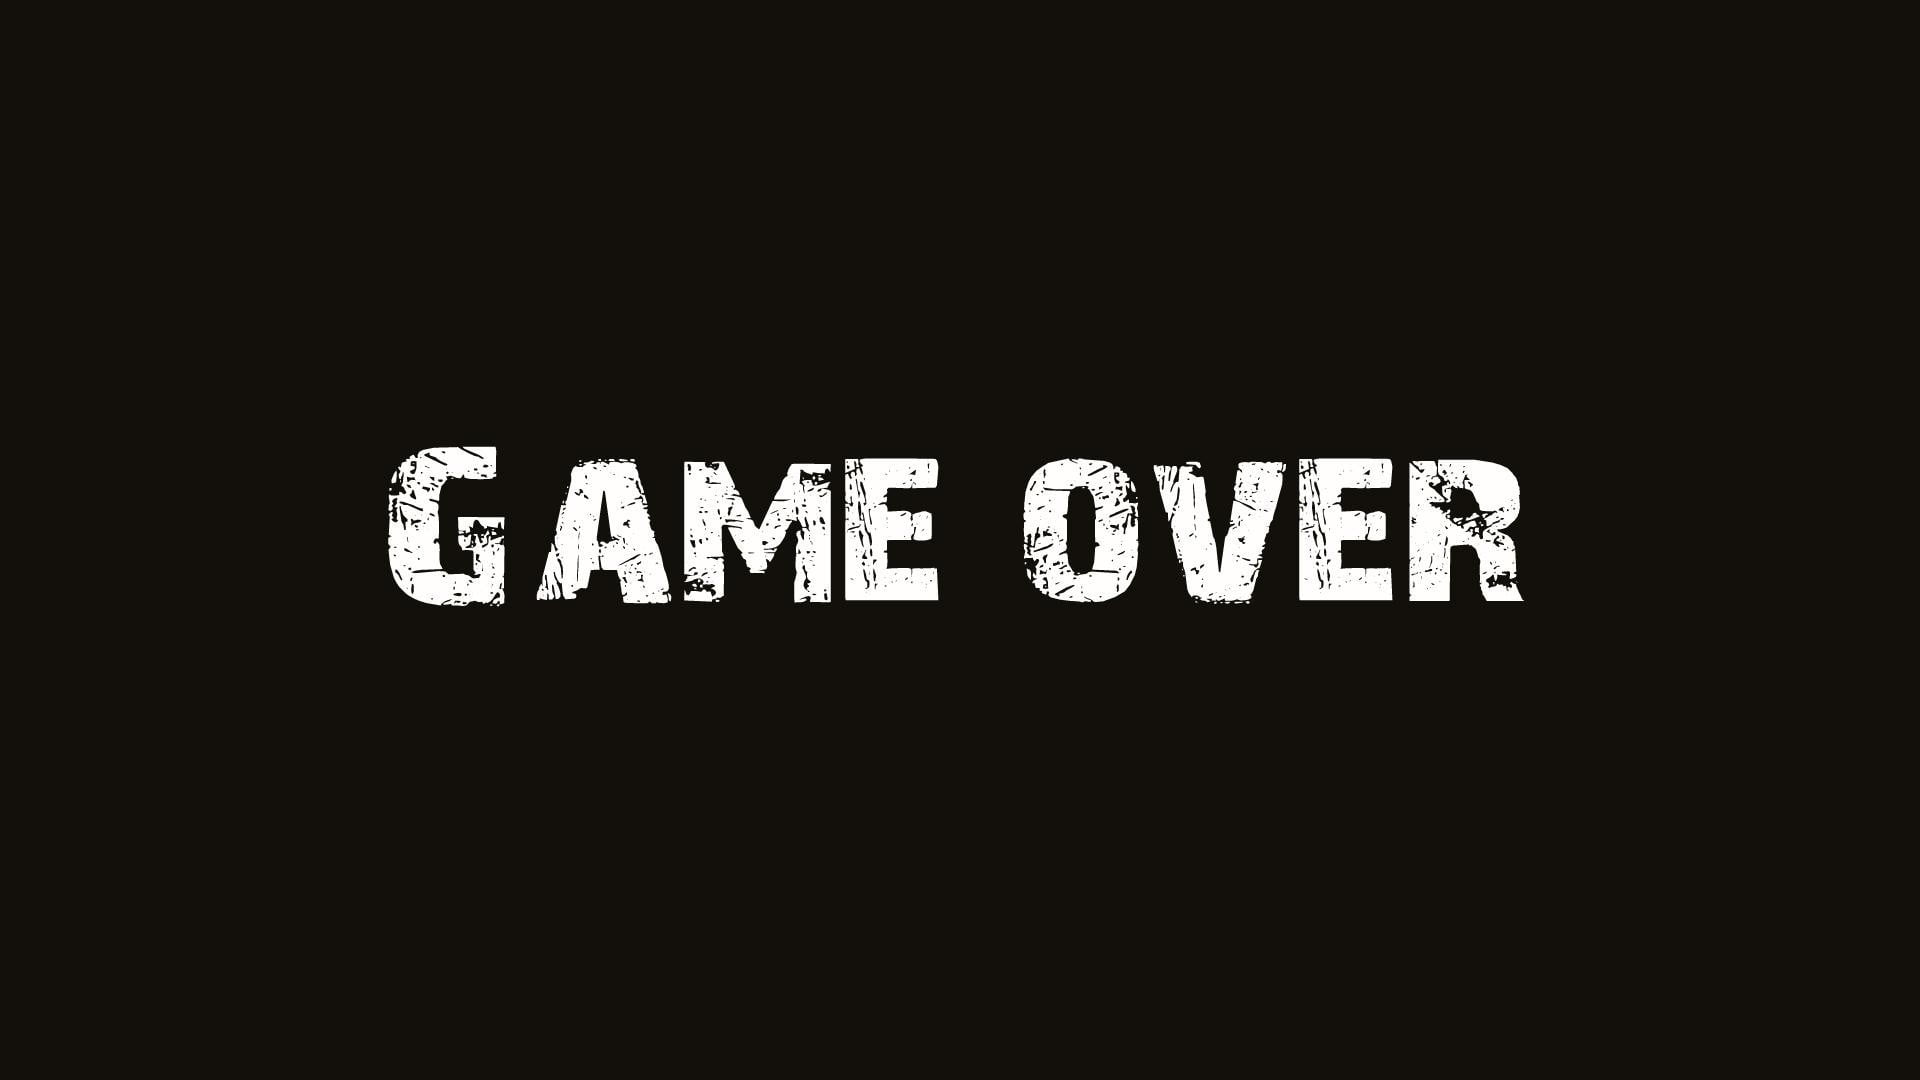 black background with game over text overlay, typo, minimalism, GAME OVER, video games